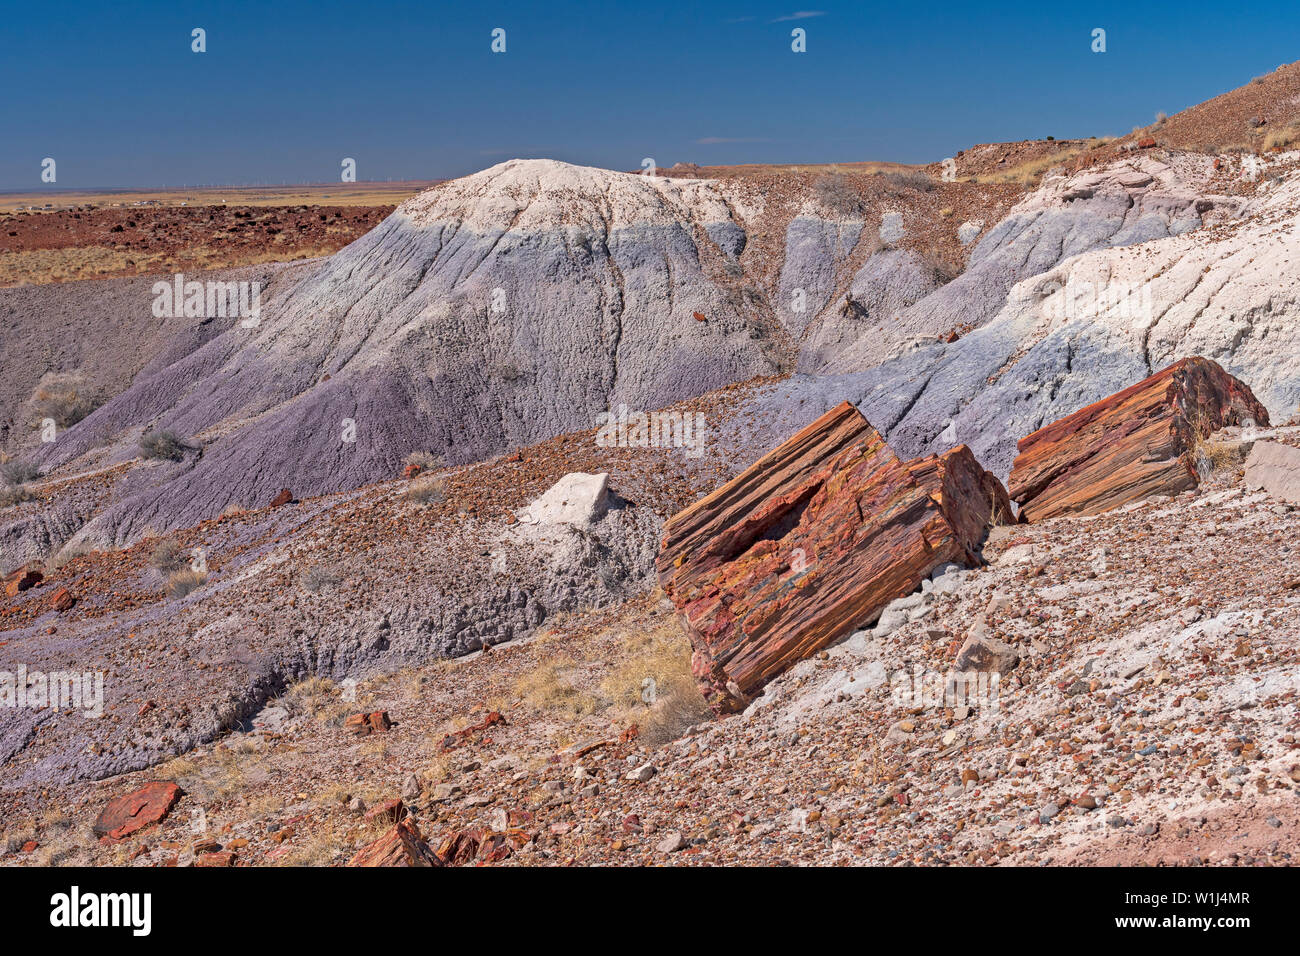 Petrified Wood in the Colorful Hills of the Painted Desert in Petrified Forest National Park in Arizona Stock Photo